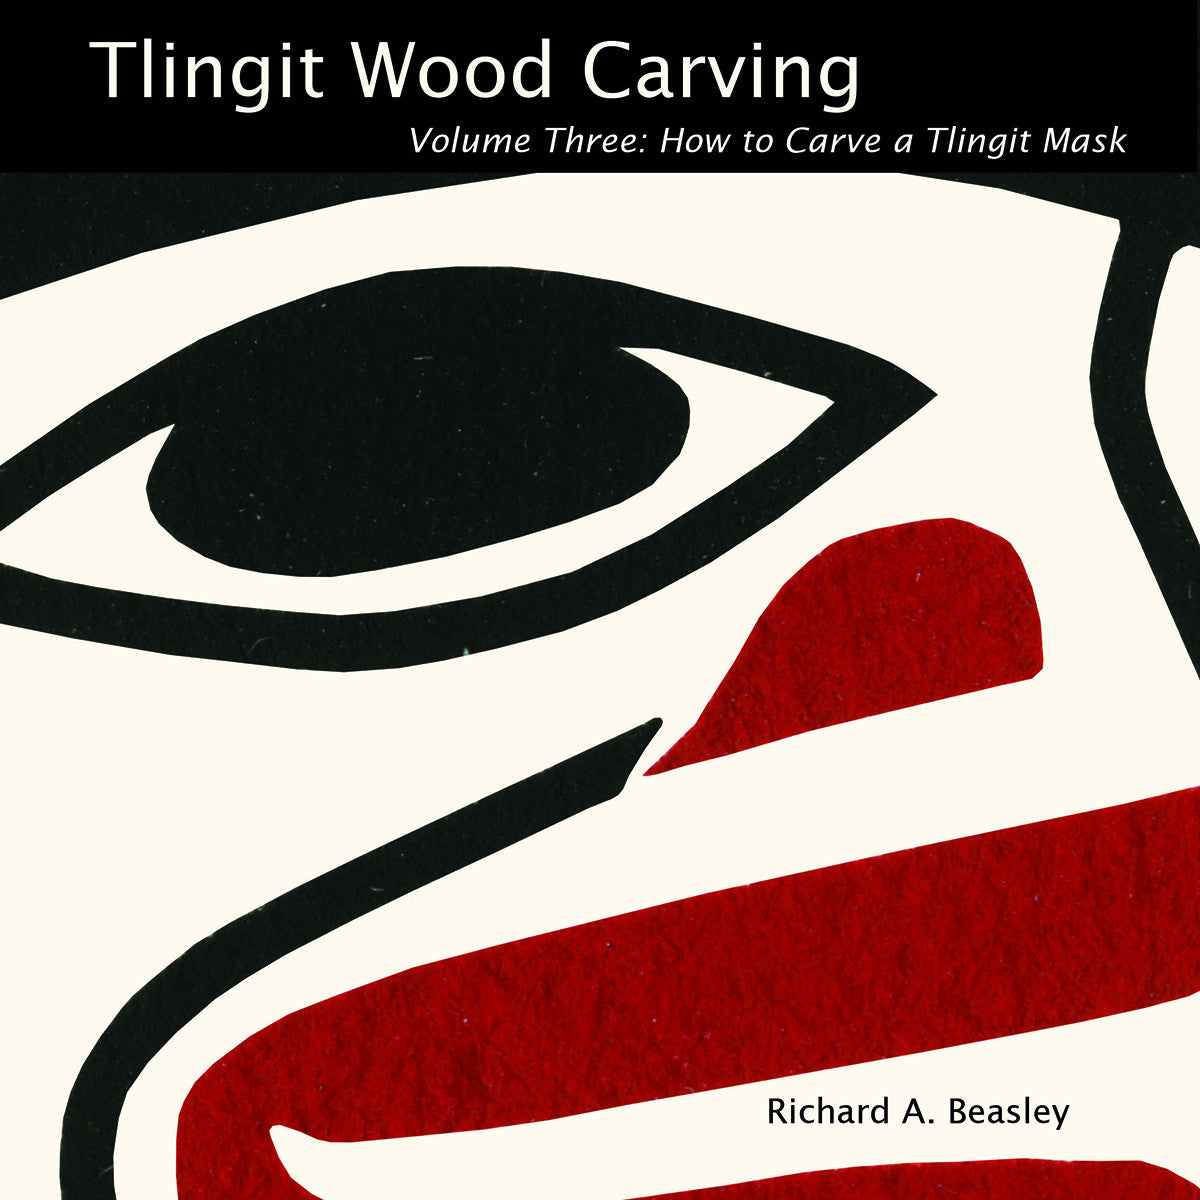 Book - "Tlingit Wood Carving: How to Carve a Mask", R. Beasley